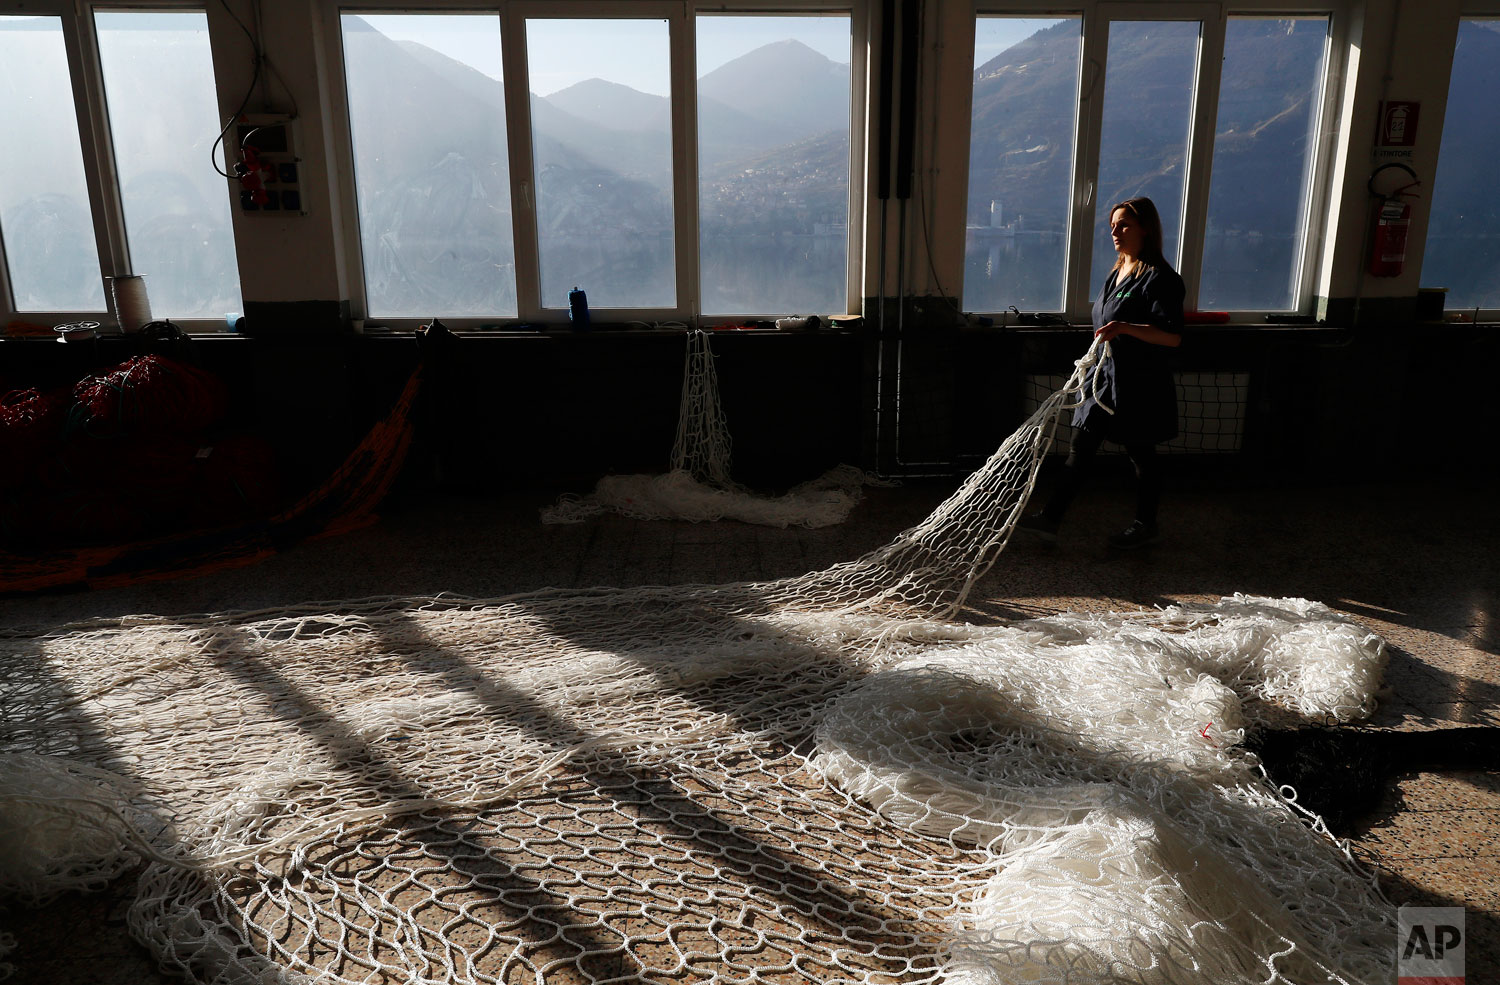  In this photo taken on Wednesday, Feb. 6, 2019, a woman works at "La Rete" (The Net) factory in Monte Isola, Lake Iseo, northern Italy.  (AP Photo/Antonio Calanni) 